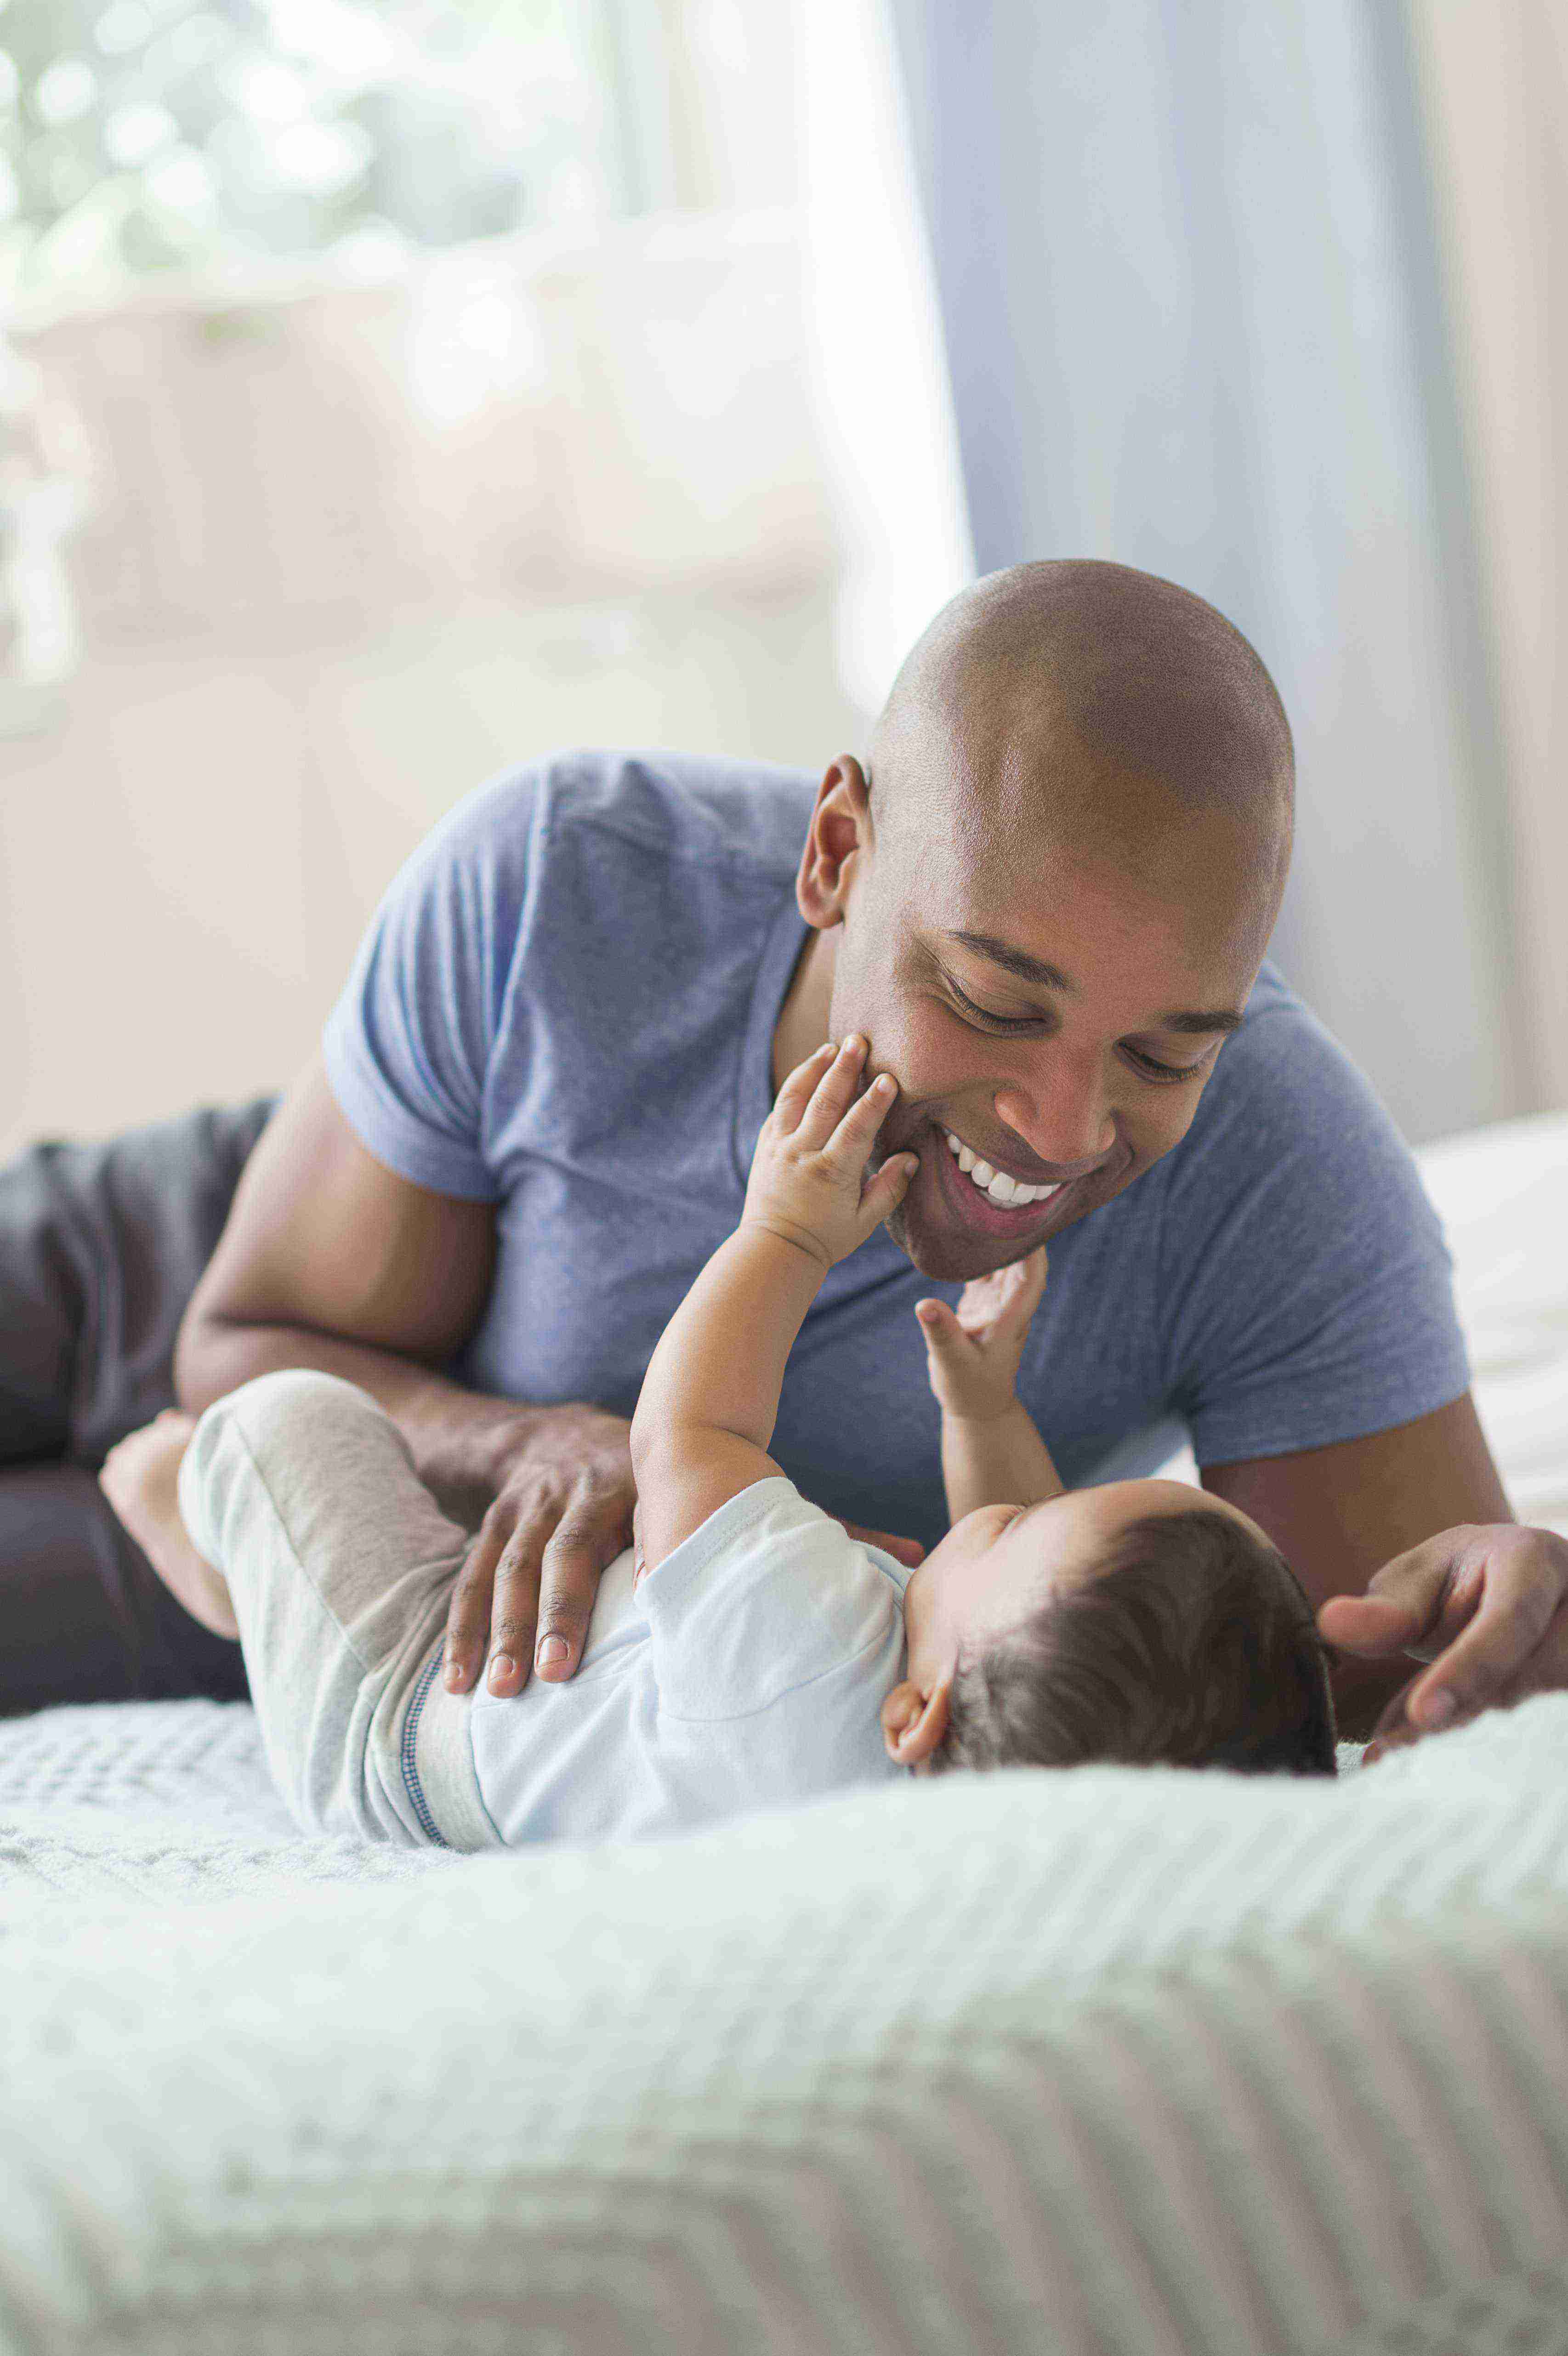 A baby is laying on a bed touching the face of a smiling man leaning over him